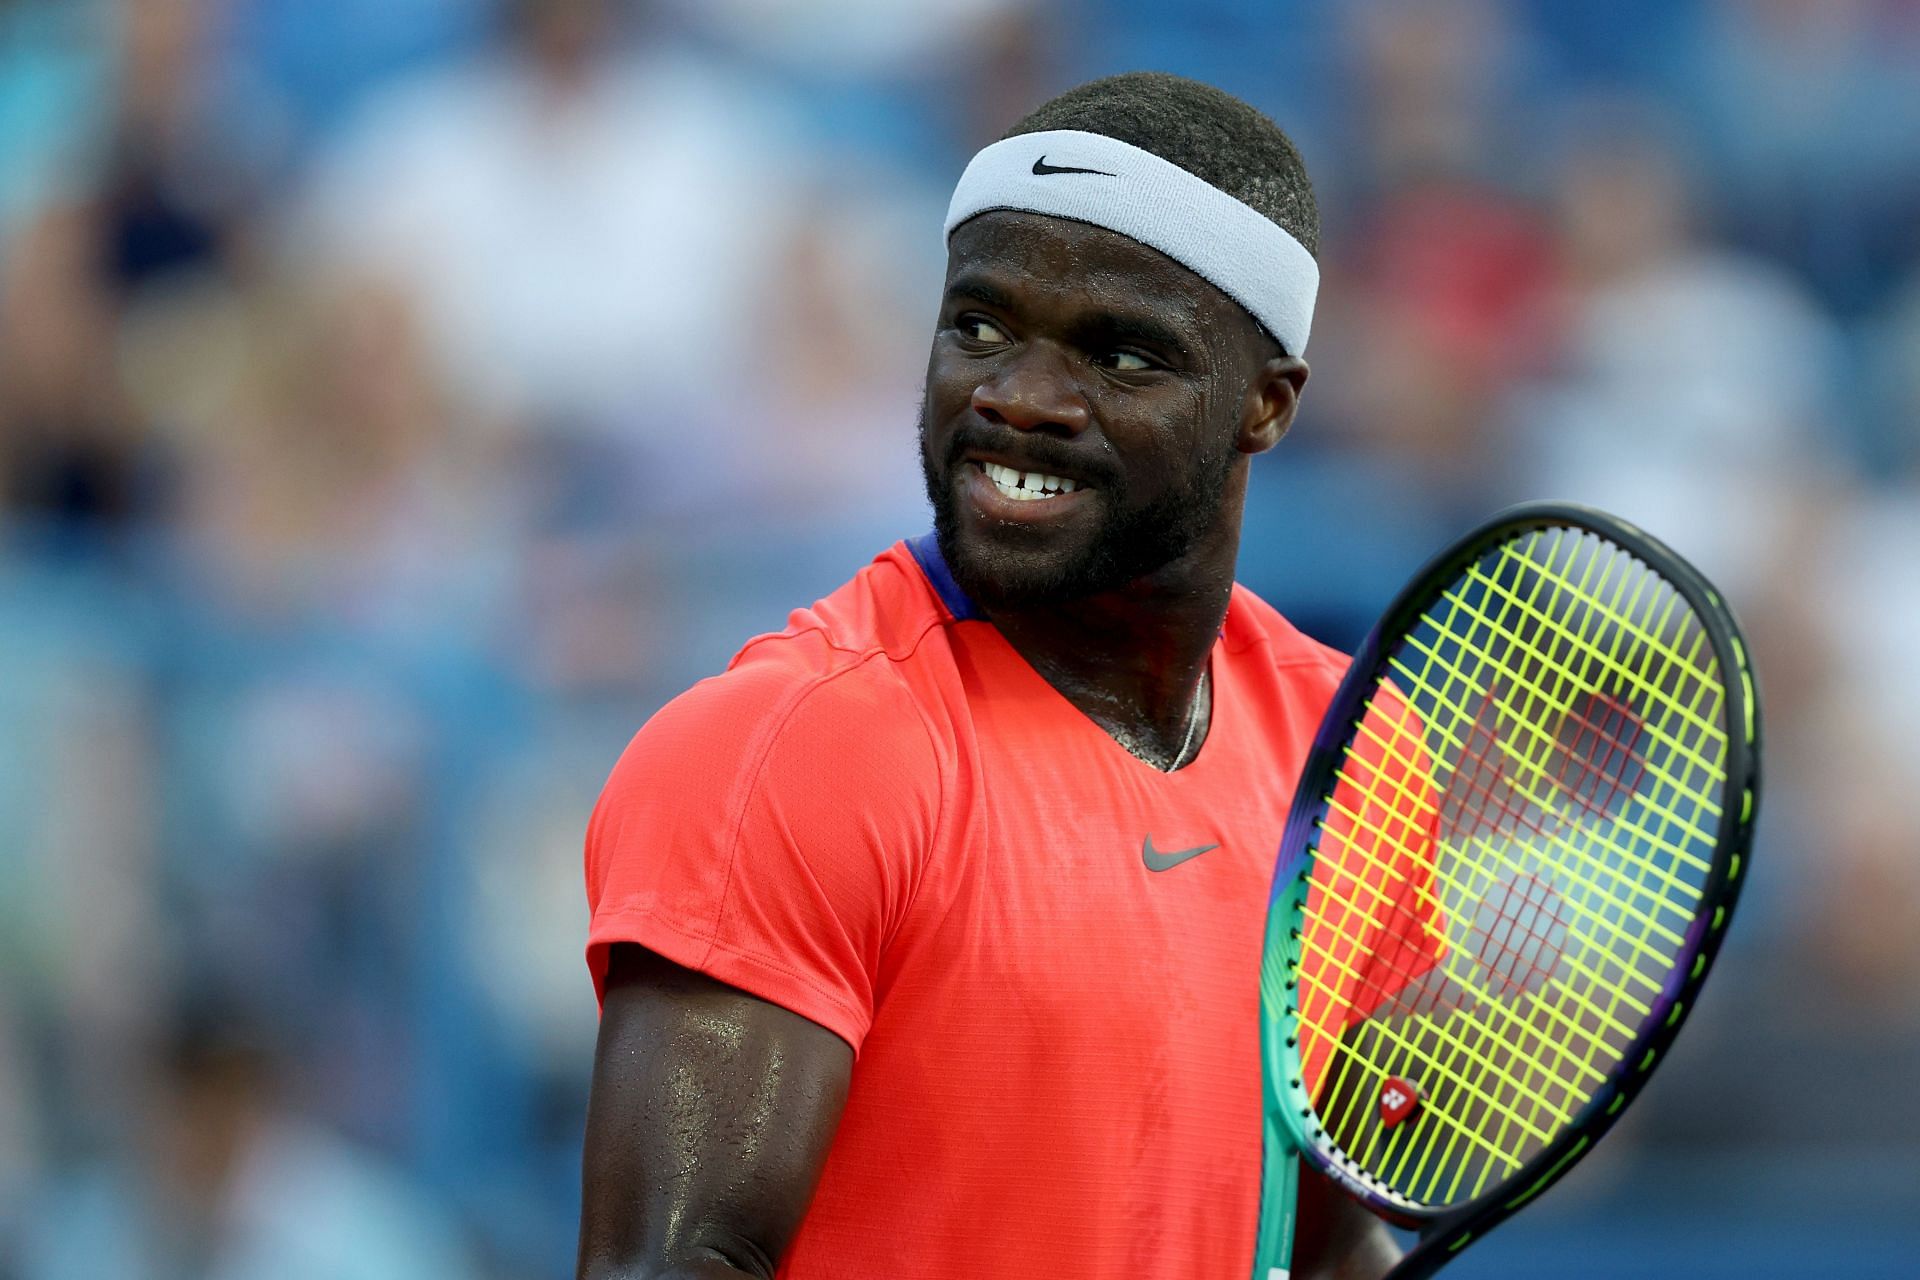  Tiafoe in action at the Citi Open - Day 5